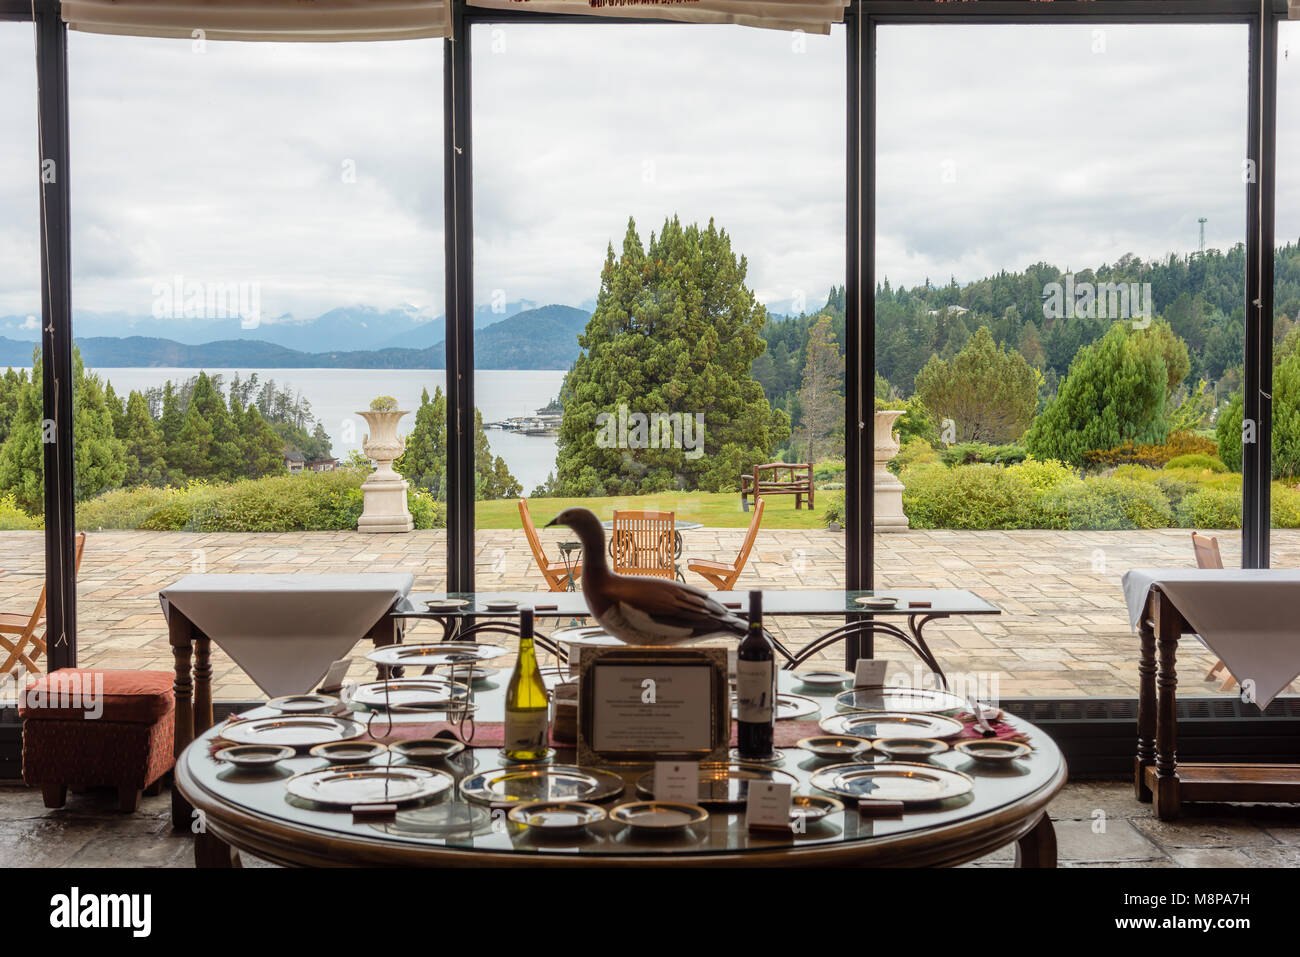 Breakfast table with a view, Bariloche, Argentina Stock Photo